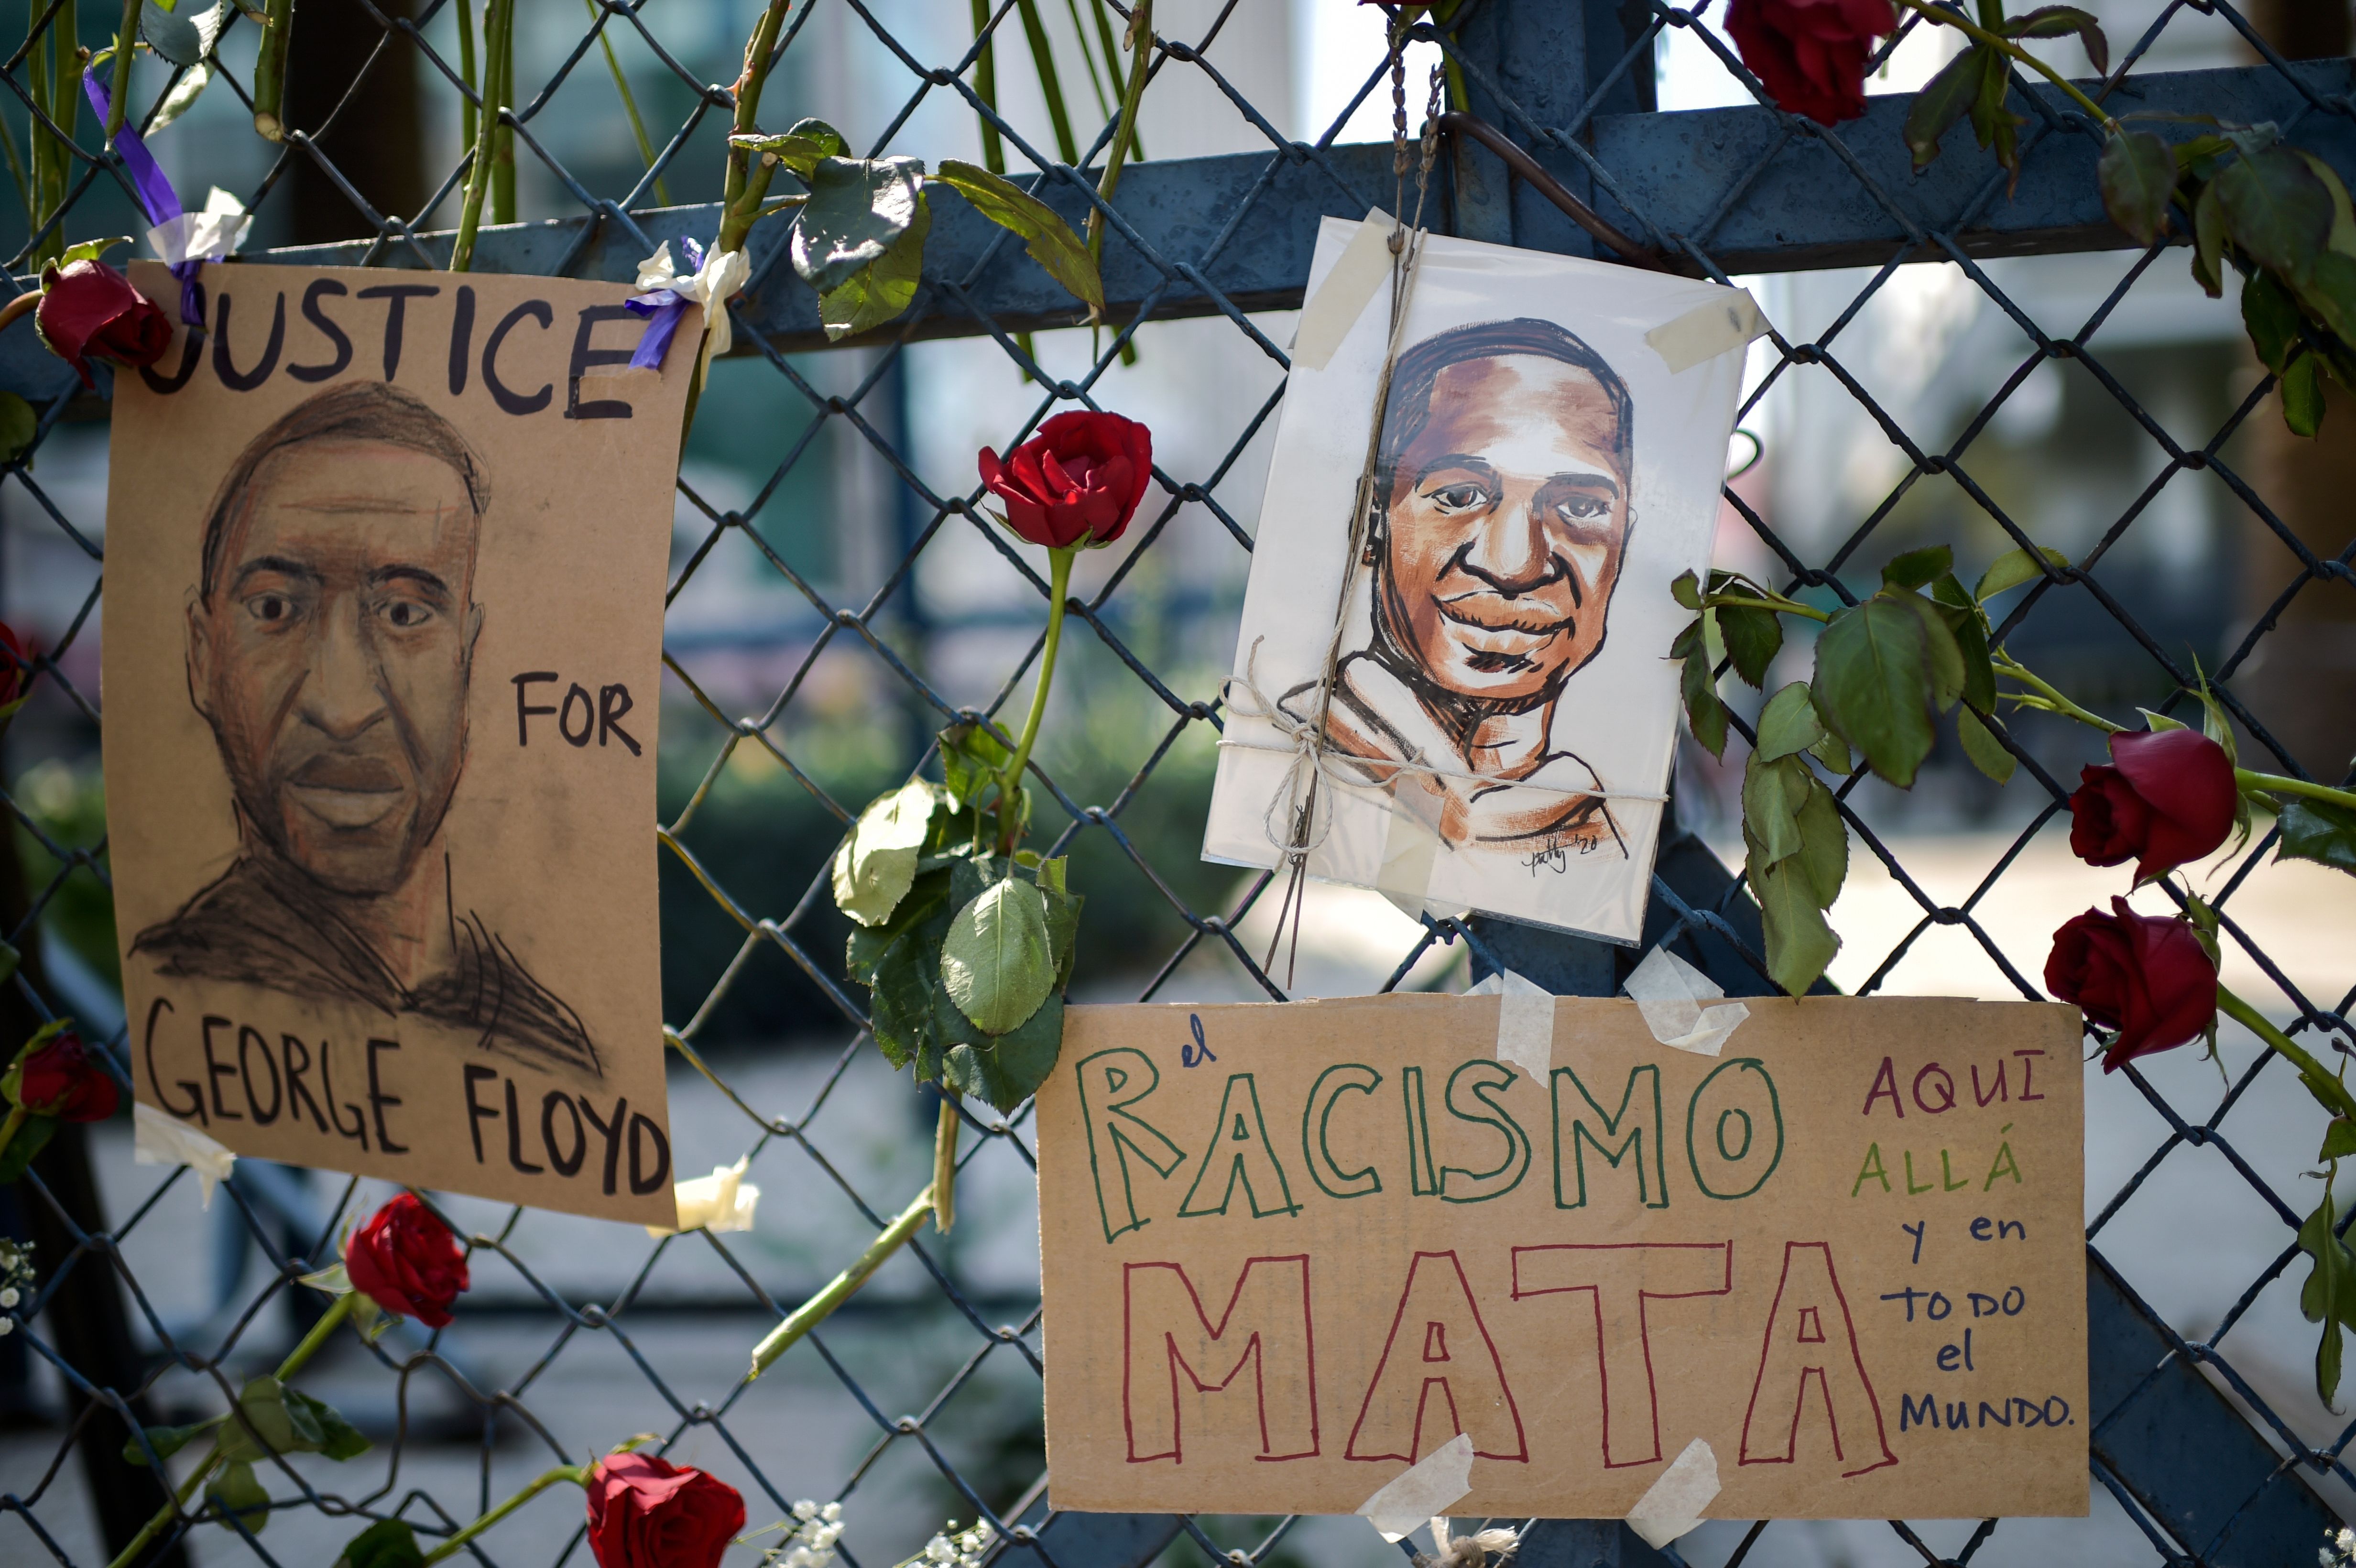 Hand drawn portraits of George Floyd or hung on a gate in Mexico City and and a sign reading "Racism kills, here, there, and all over the world"